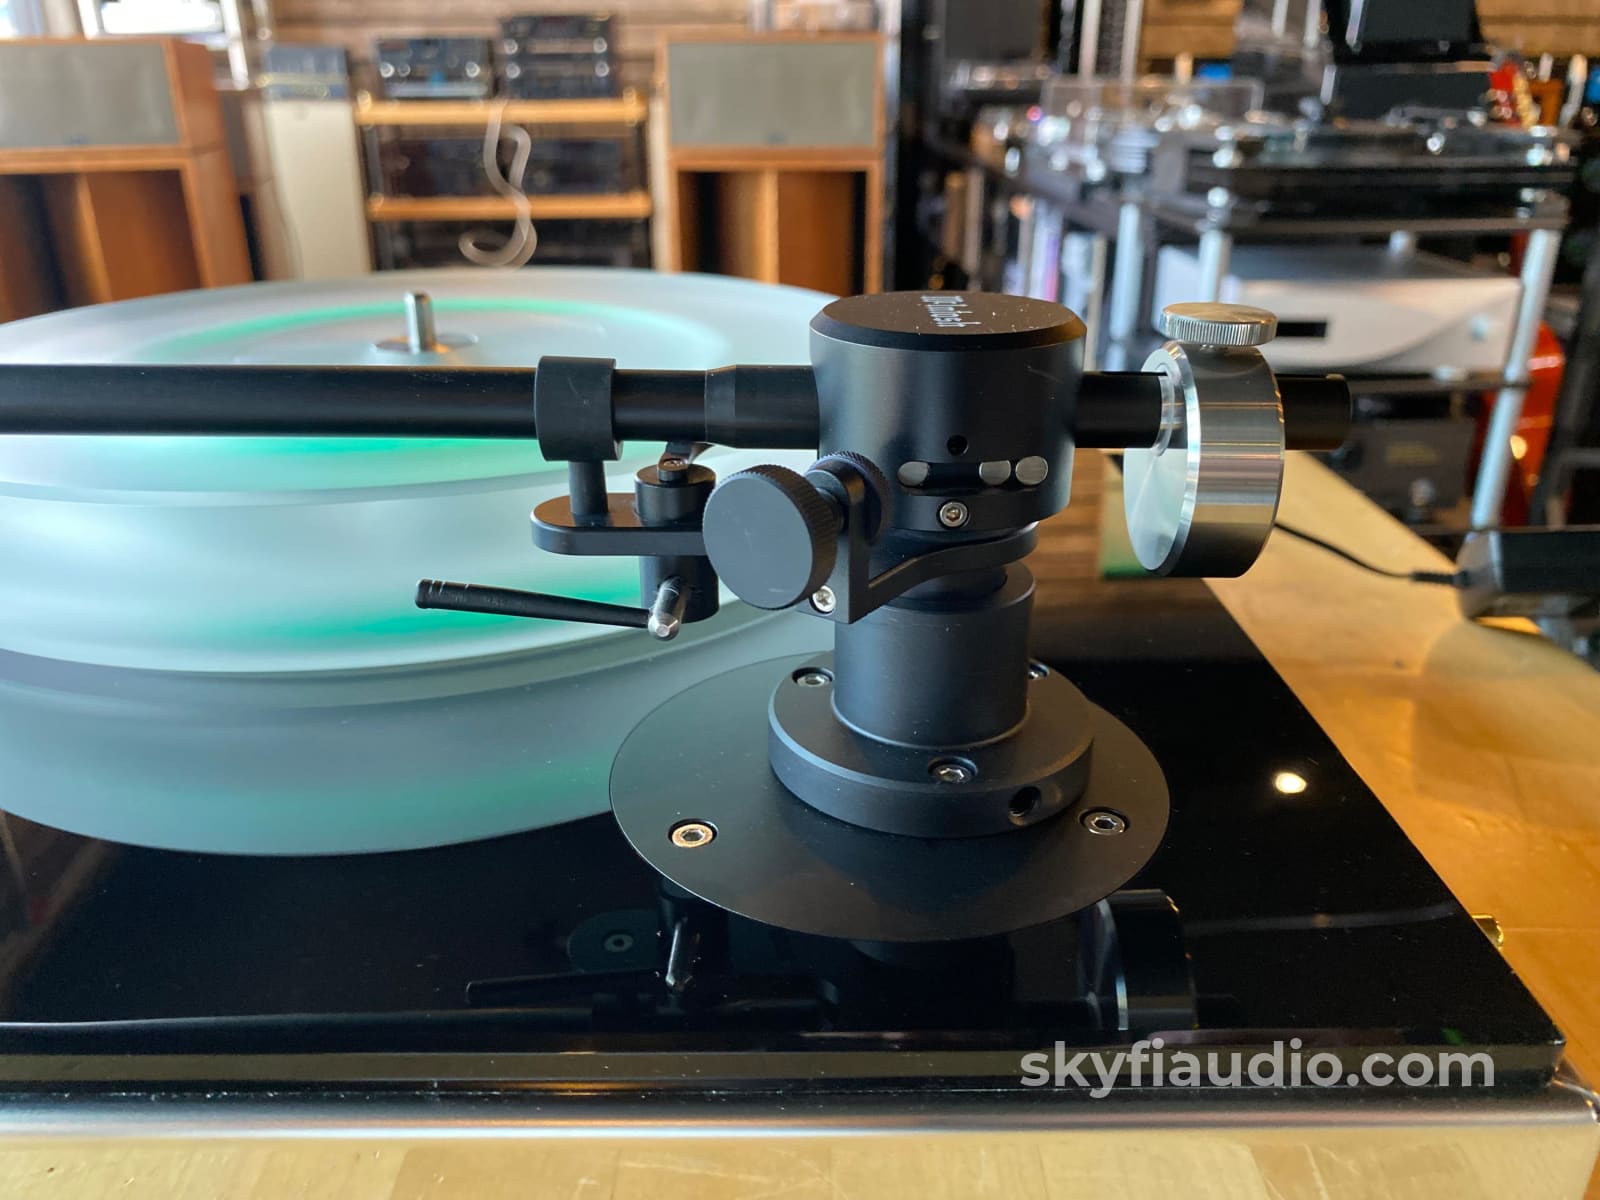 Mcintosh Mt5 Precision Table With New Sumiko Blue Point No.3 - In Store Only Turntable